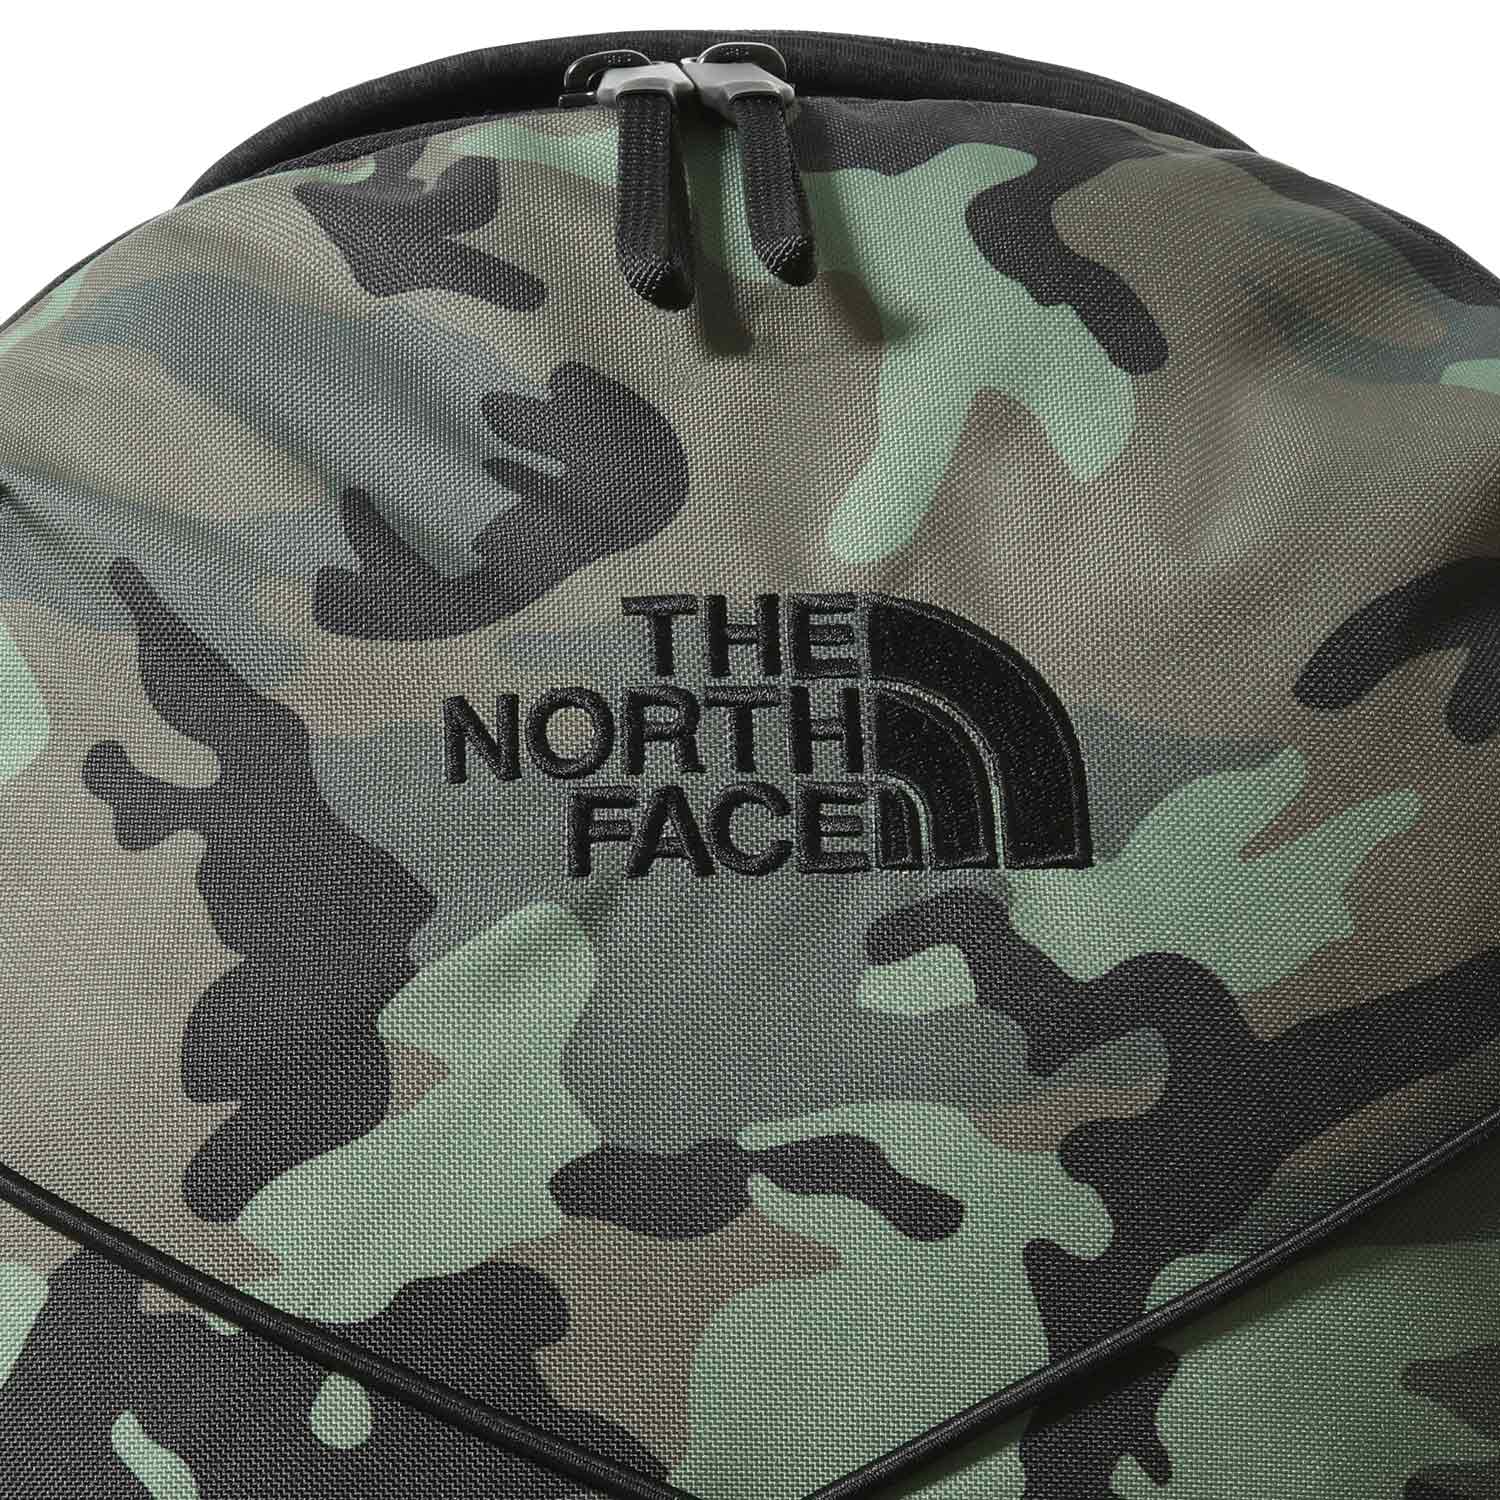 The North Face Rucksack Jester Thyme Brushwood Camo